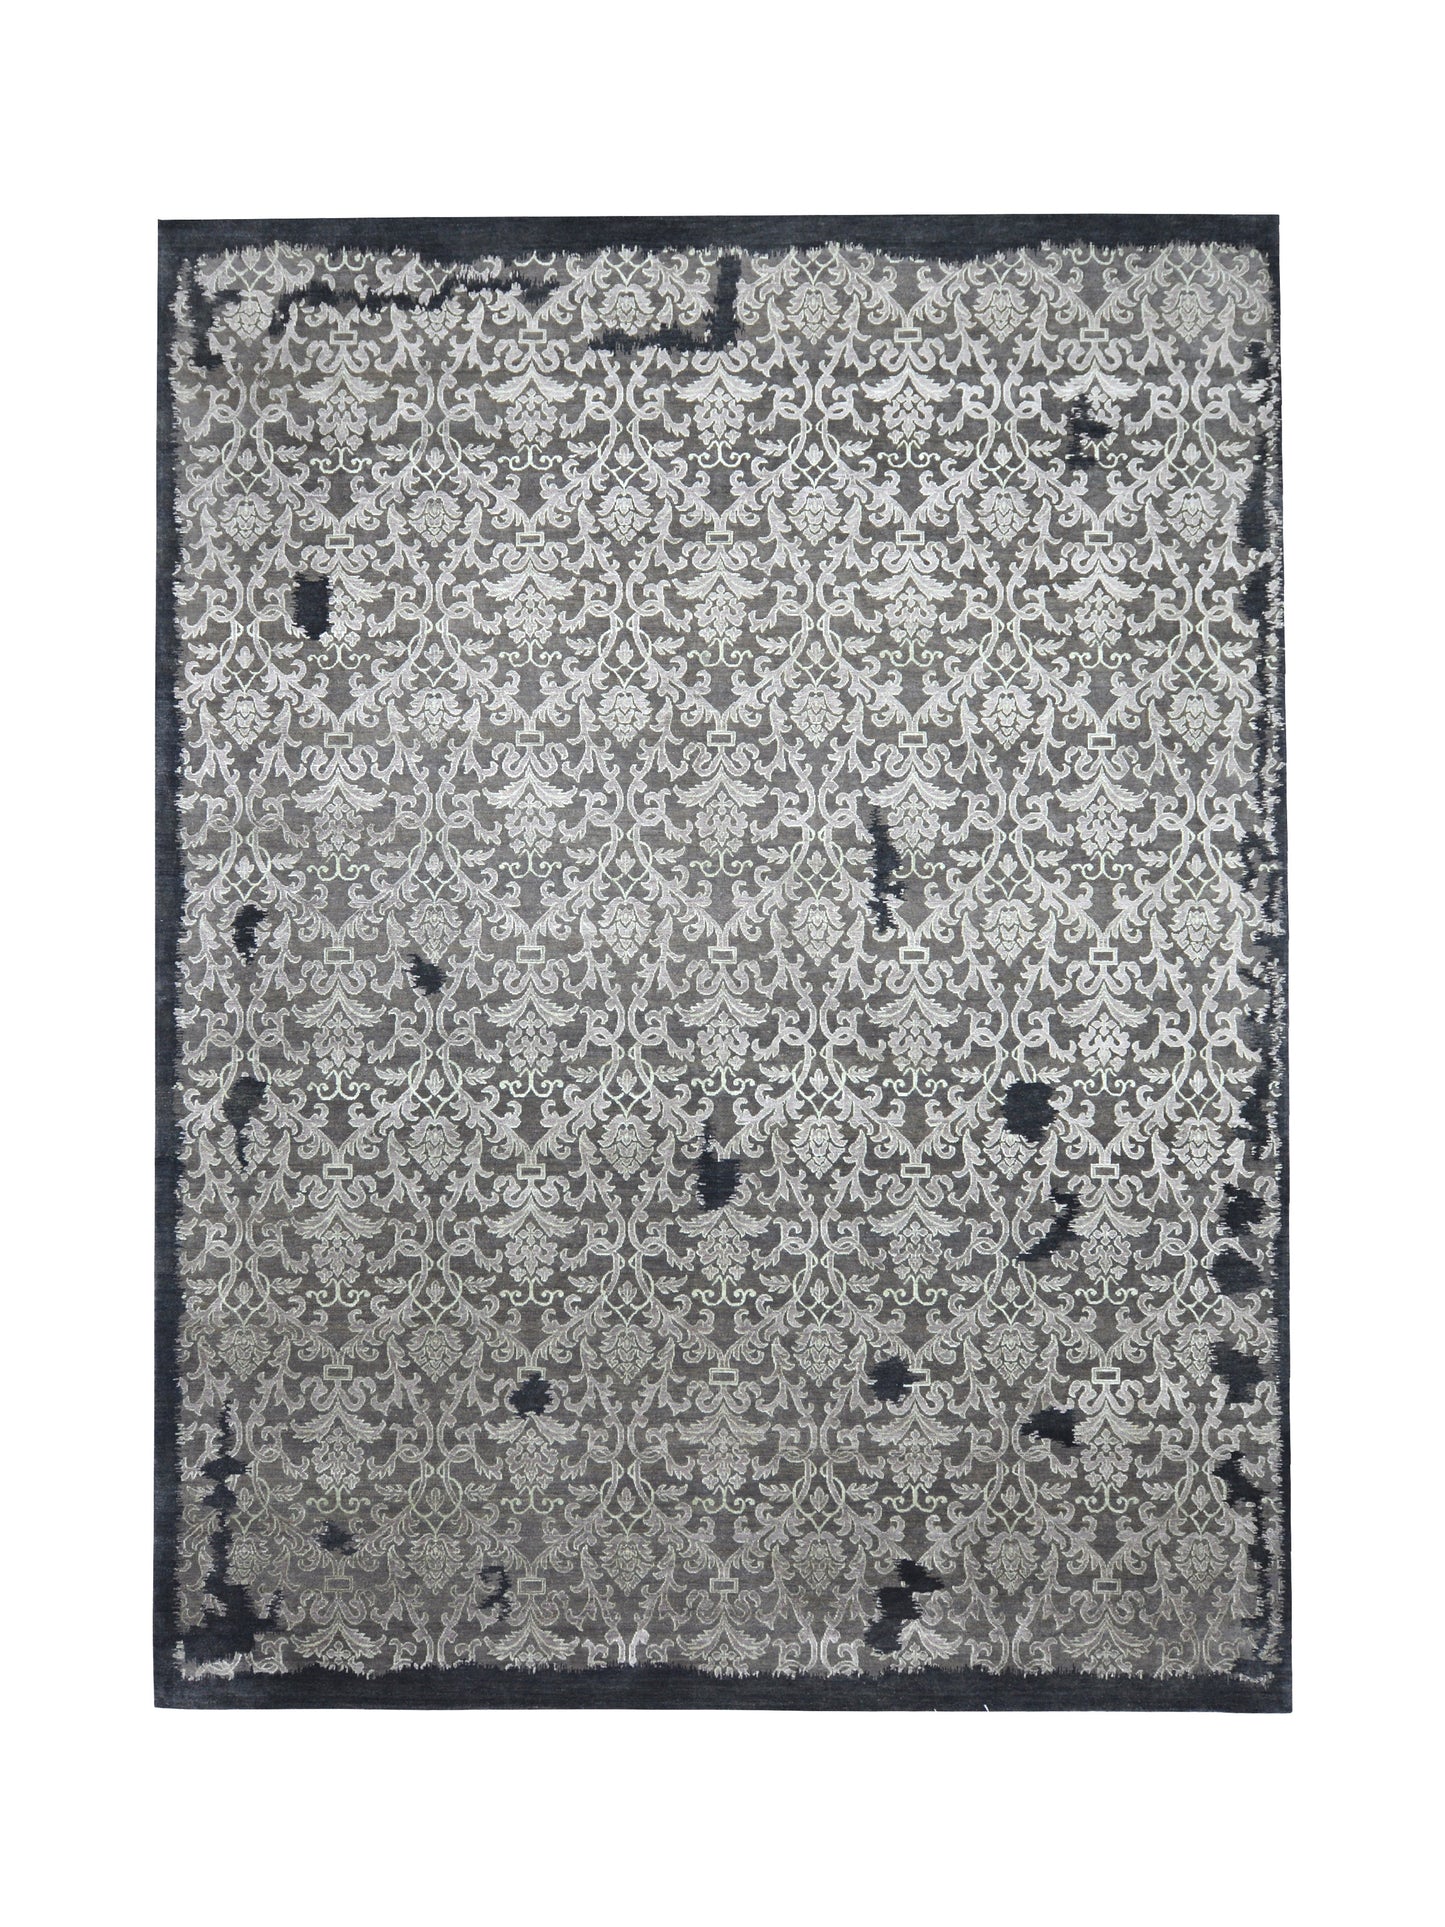 Get trendy with Erased Grey, Charcoal and Silver Transitional Silk and Wool Handknotted Area Rug - Transitional Rugs available at Jaipur Oriental Rugs. Grab yours for $5840.00 today!